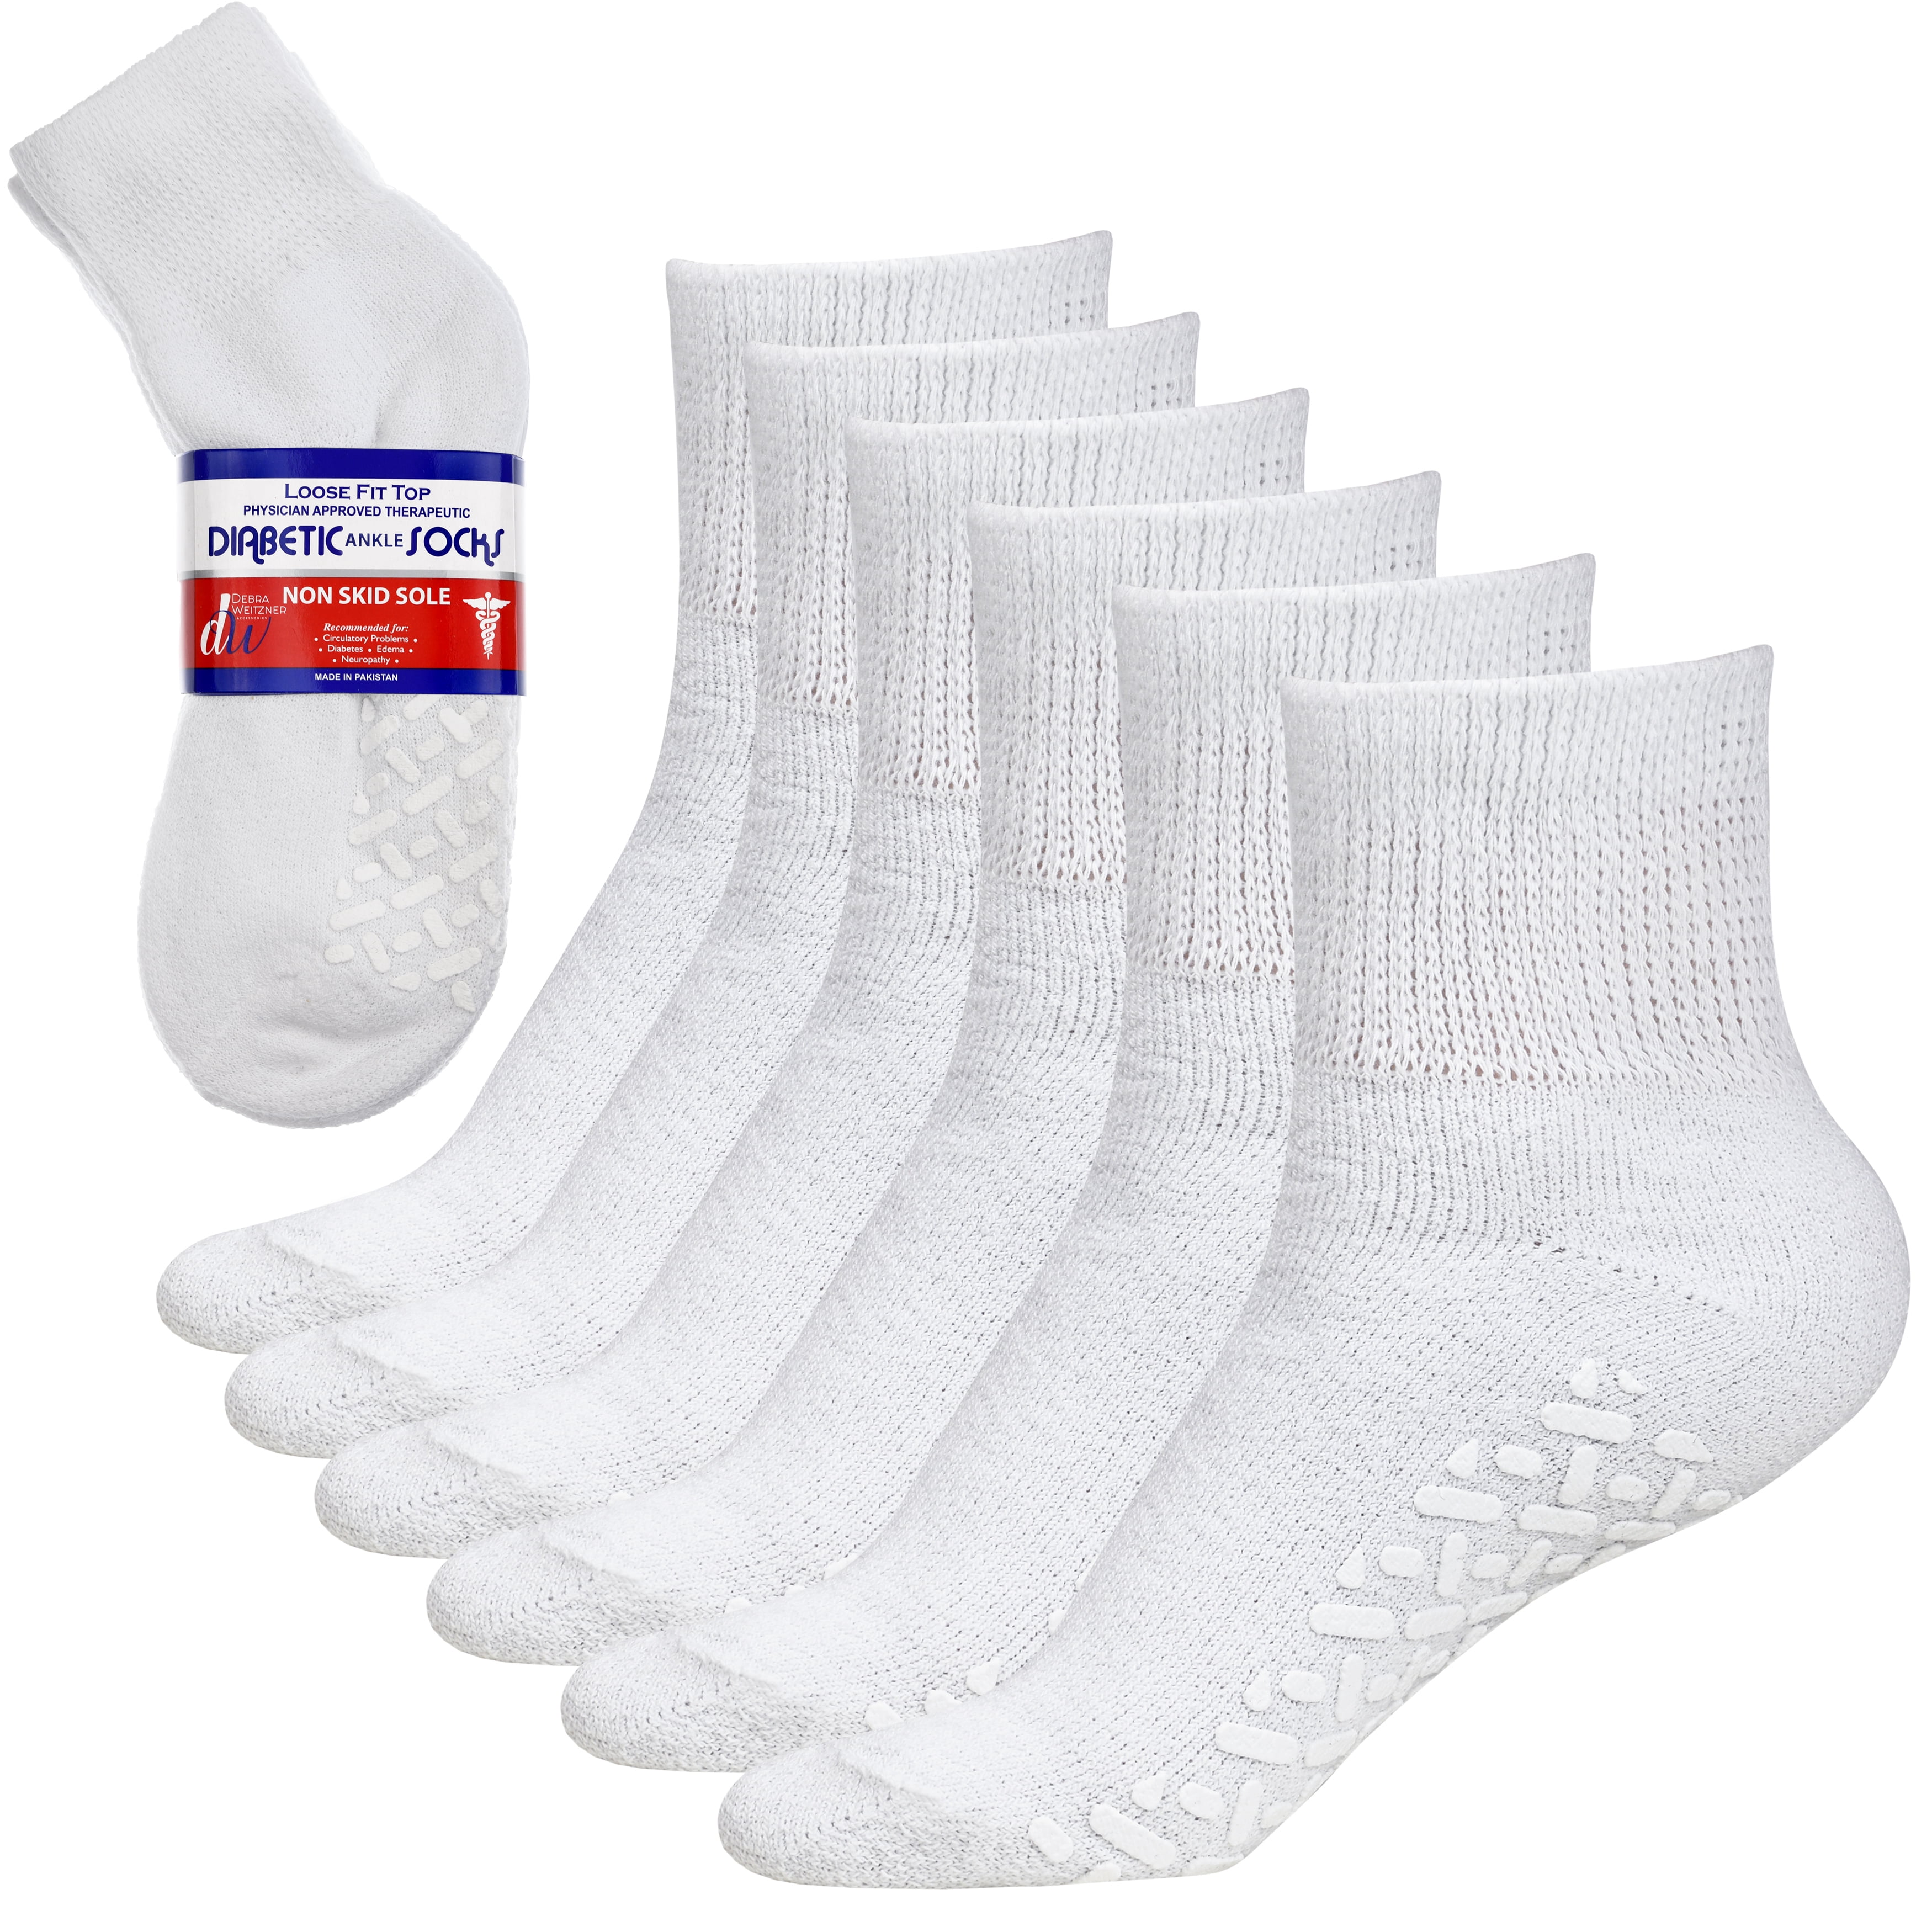 Athletic Sports Ankle/Crew Socks Cushion Stretch Cotton Casual Non-Slip Socks 6 Pack for Men Women